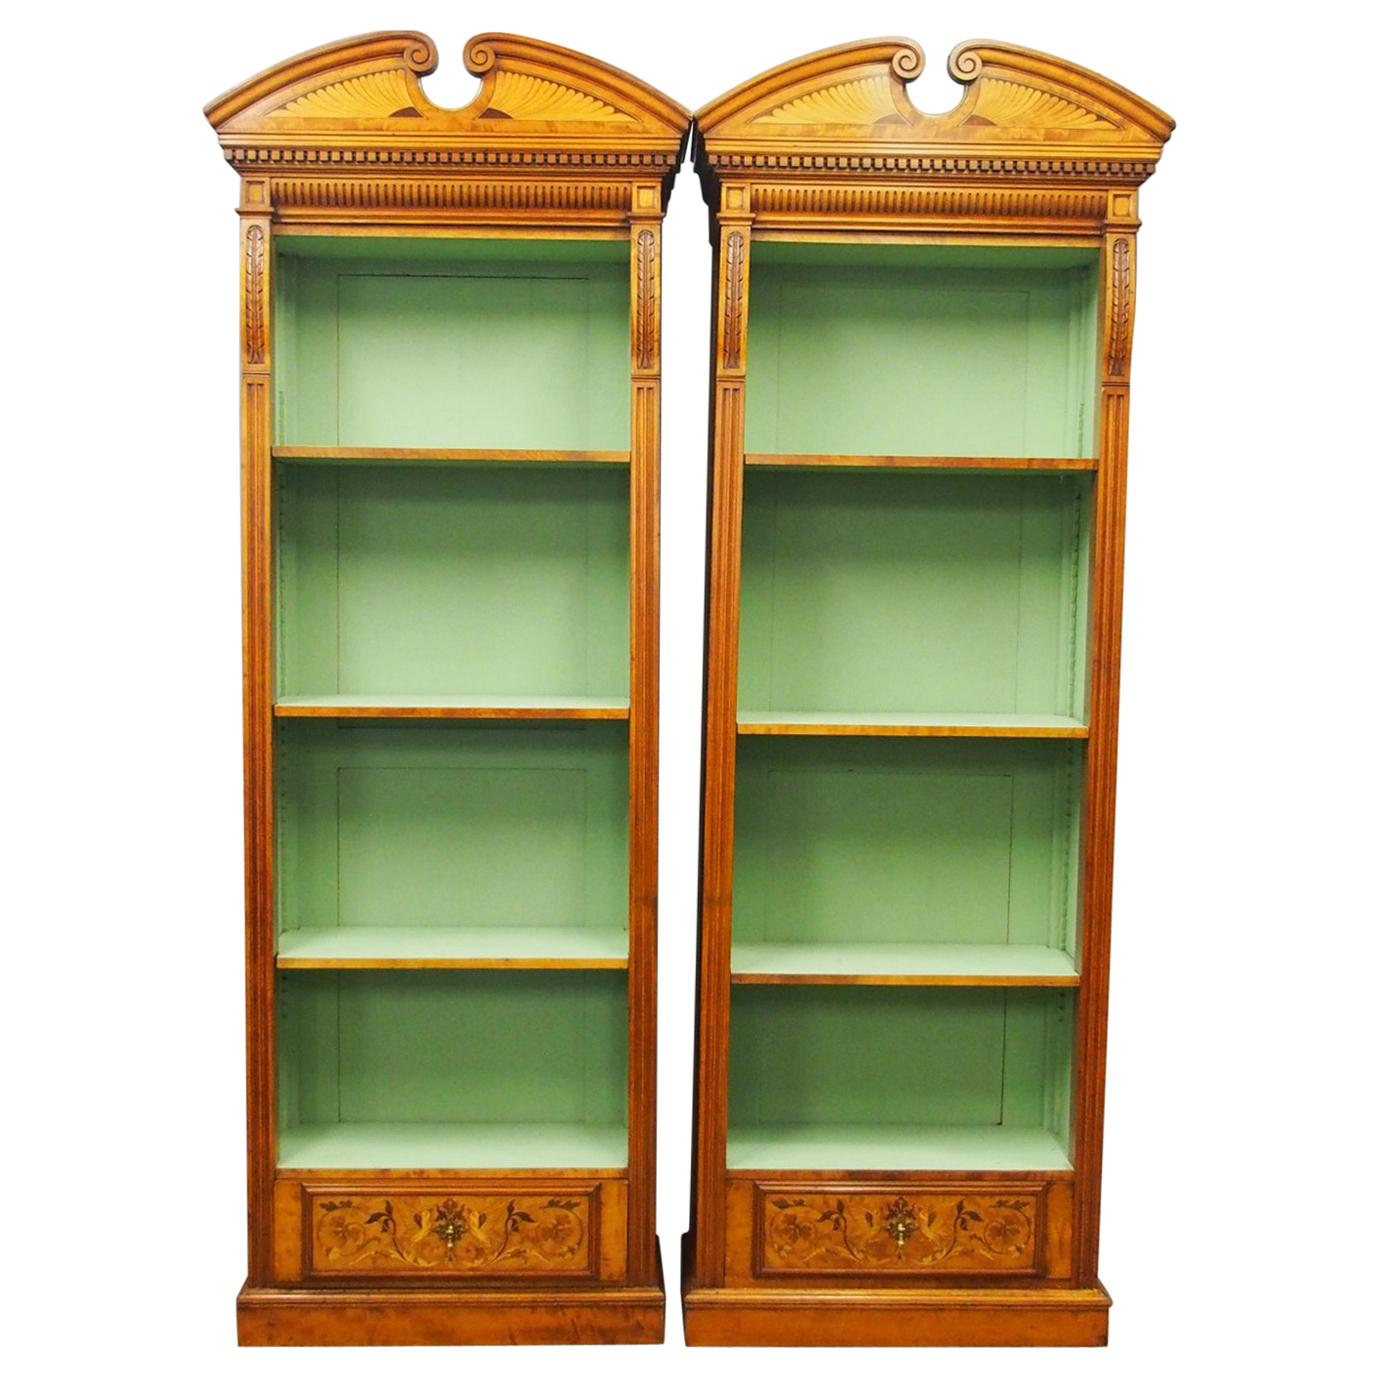 Pair of Neoclassical Style Satinwood Open Bookcases